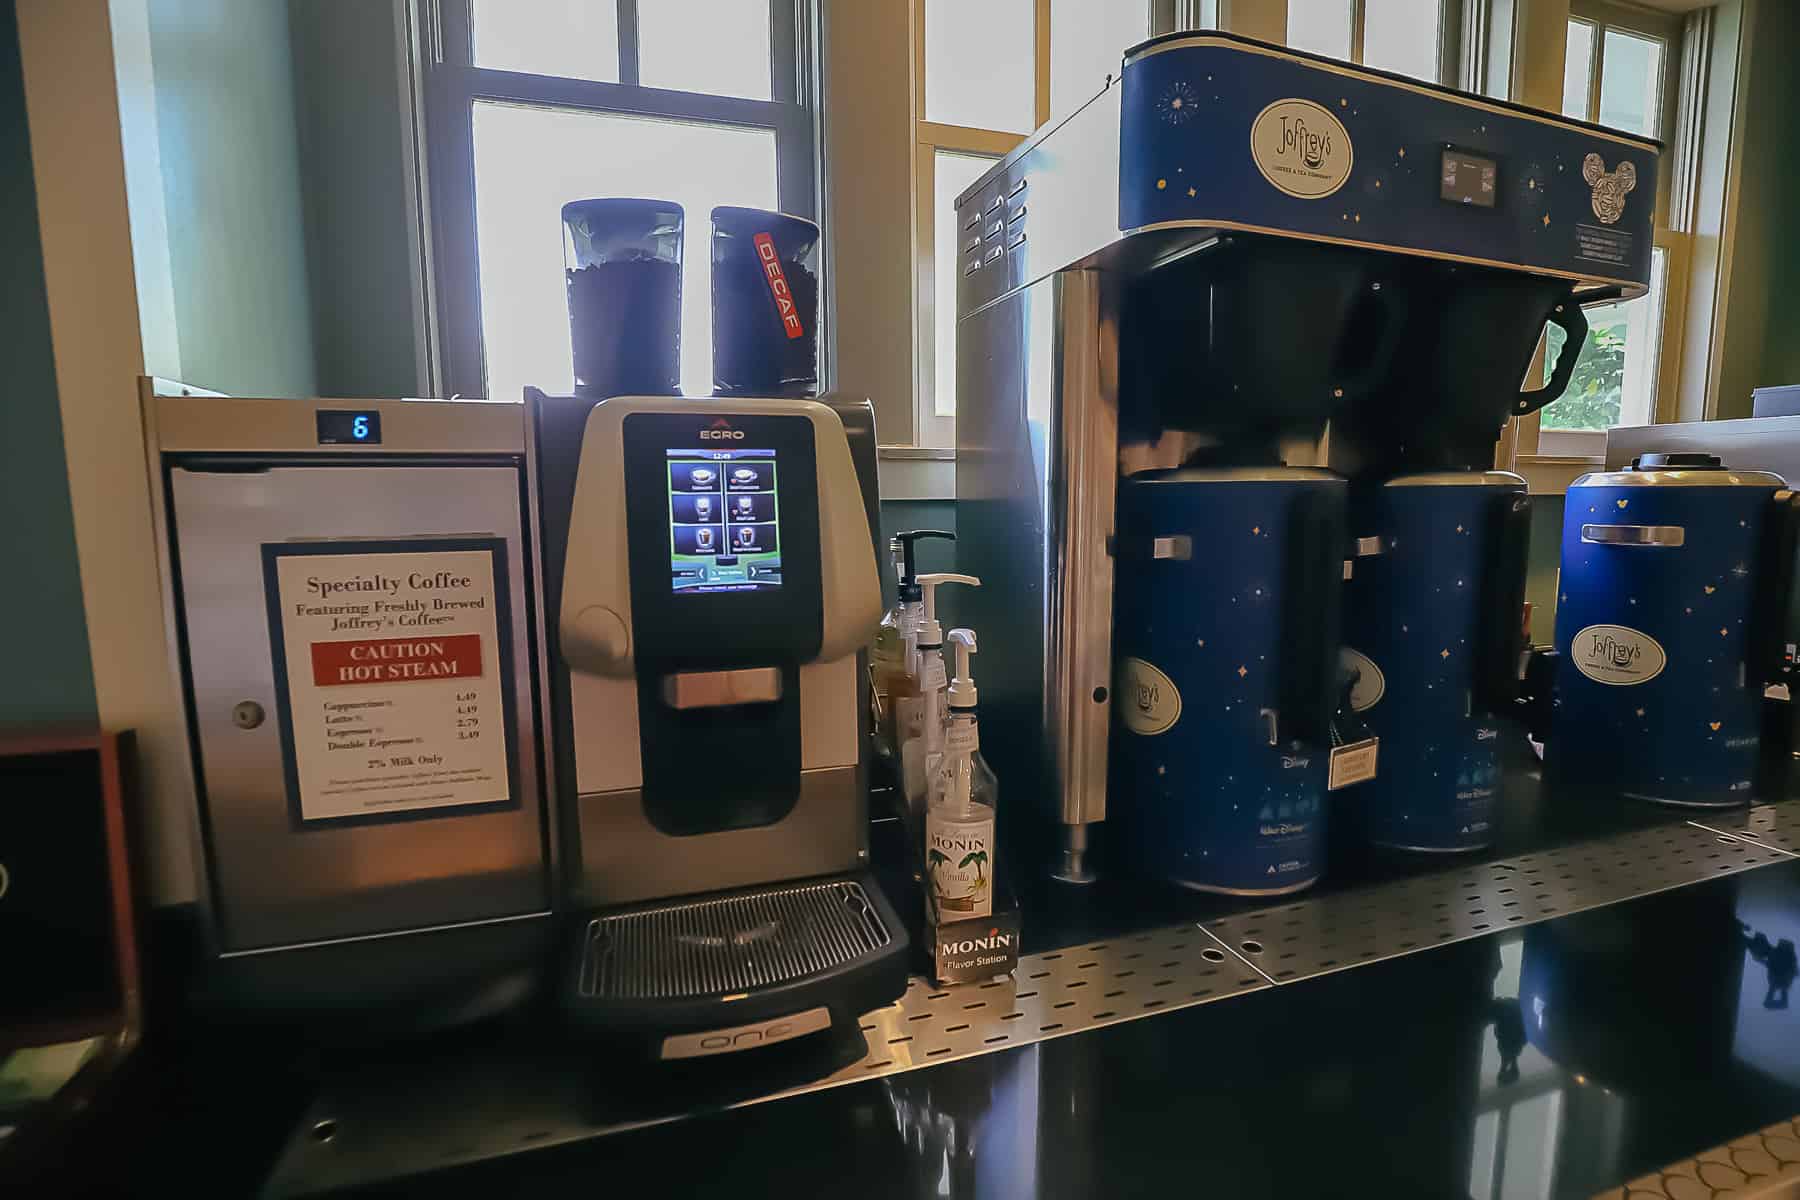 Egro specialty coffee maker at Disney's Beach Club Marketplace